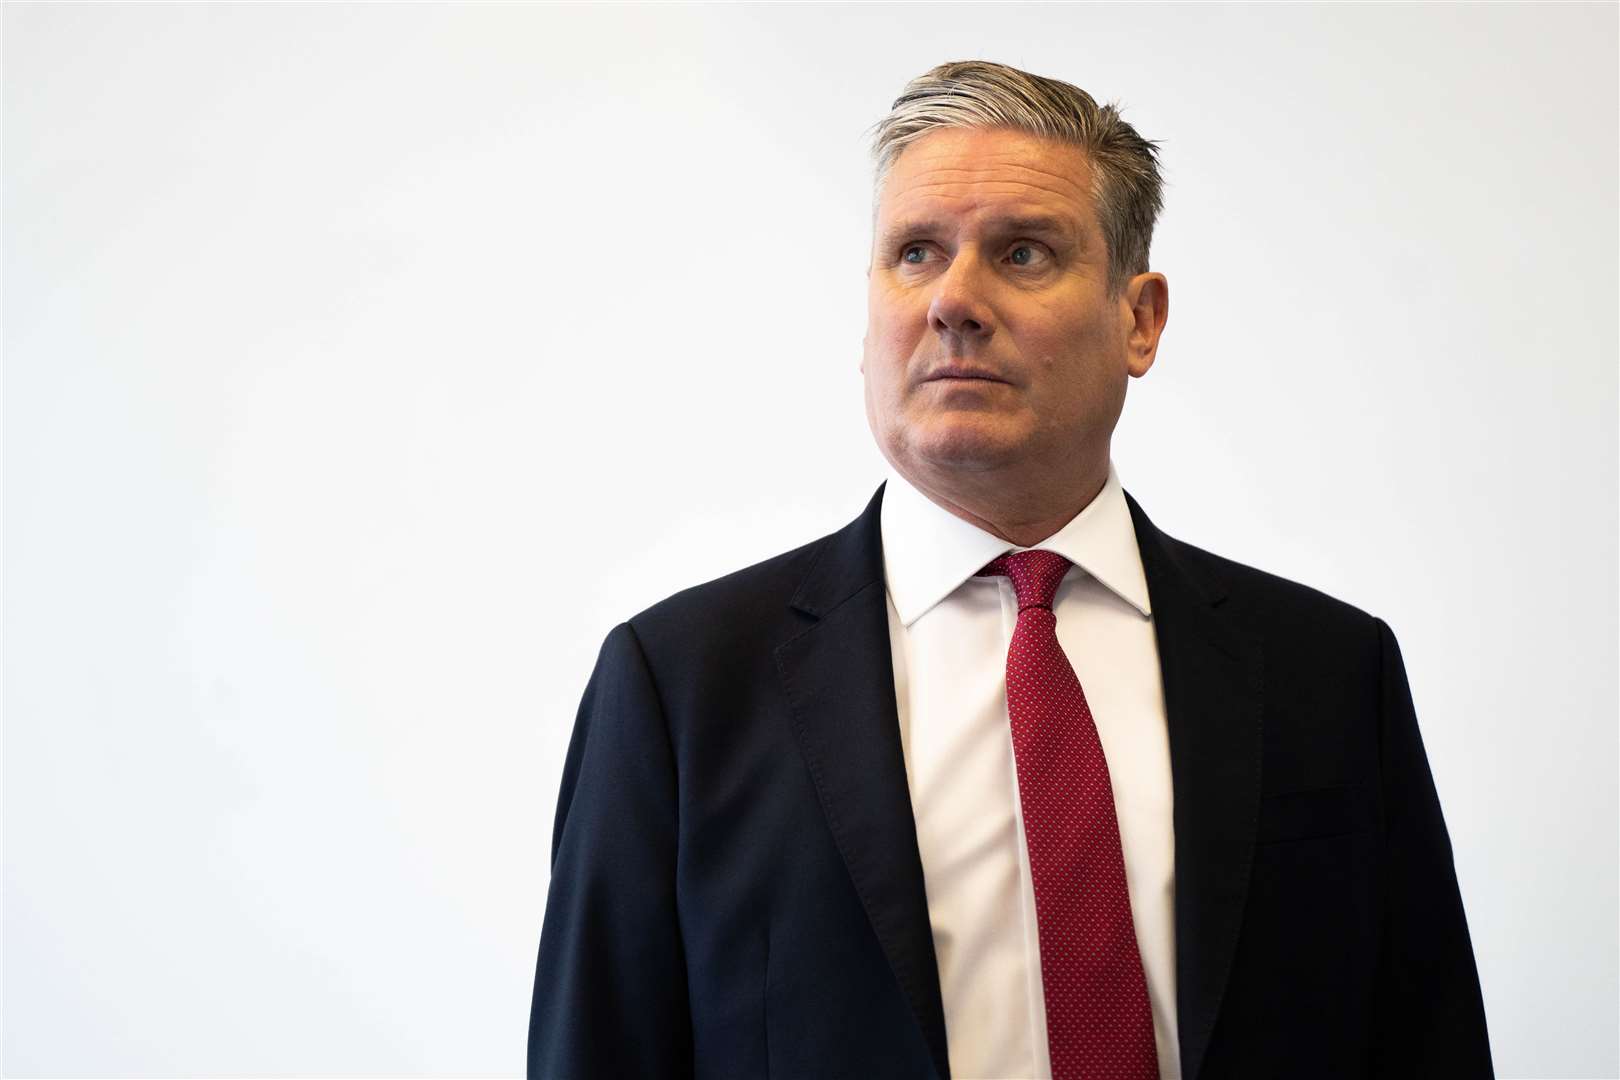 Labour leader Sir Keir Starmer declined to a commitment on pensions ahead of the election (James Manning/PA)